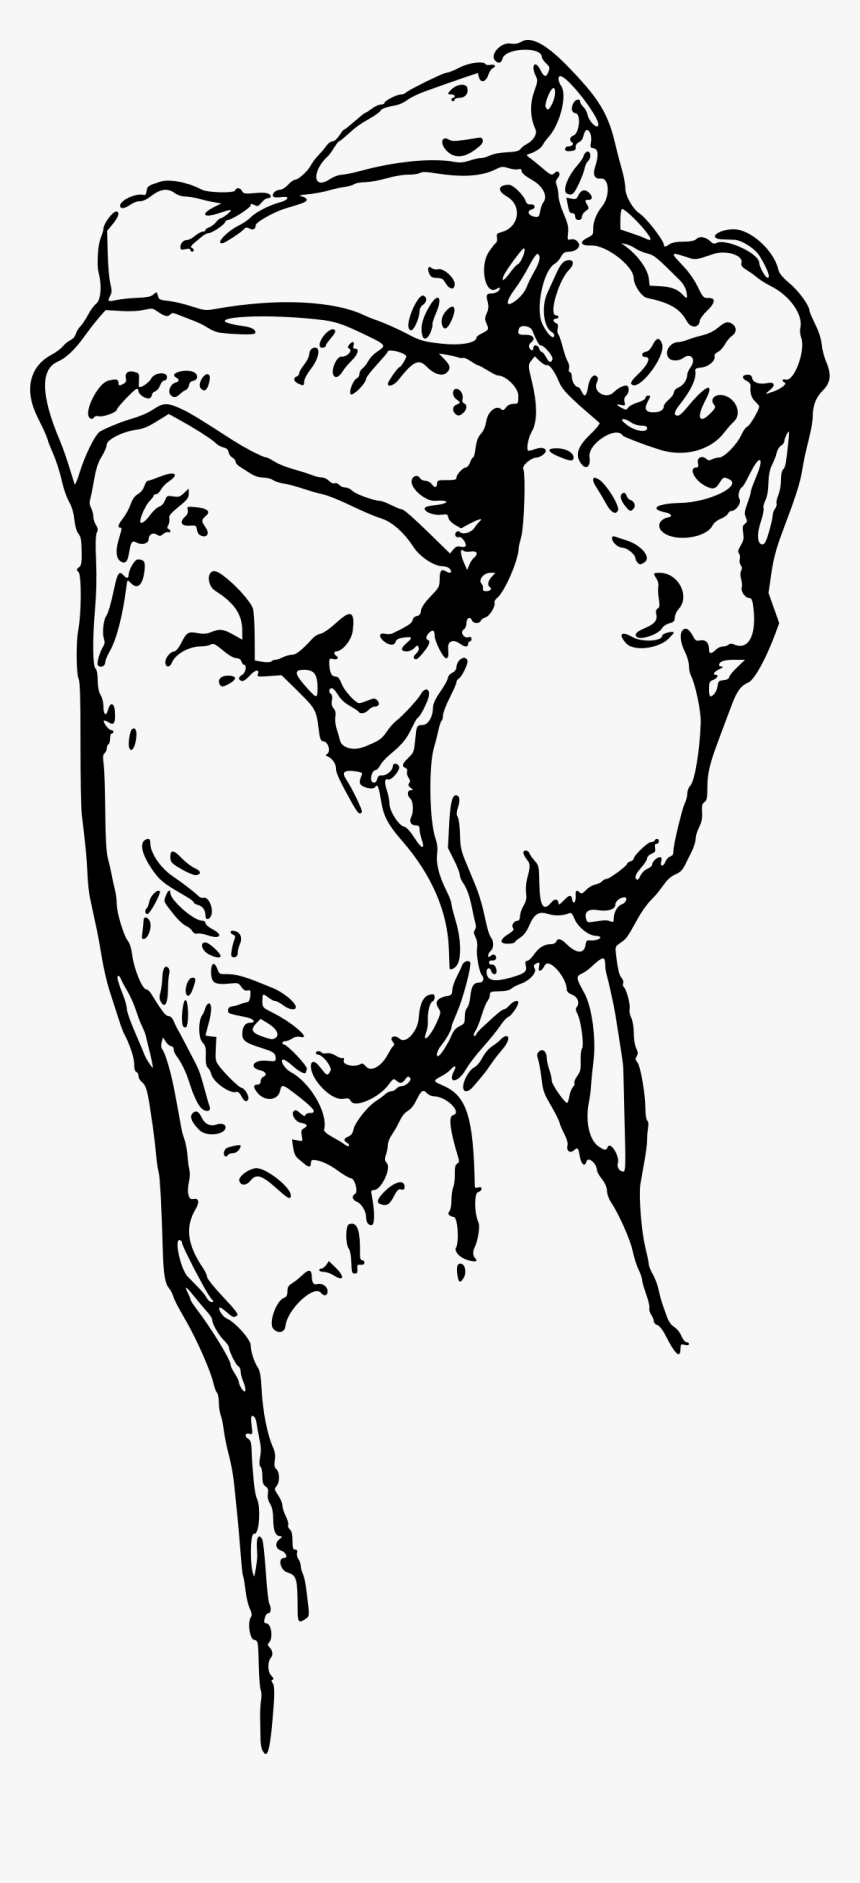 Drawings Of Fists Clenched, HD Png Download, Free Download